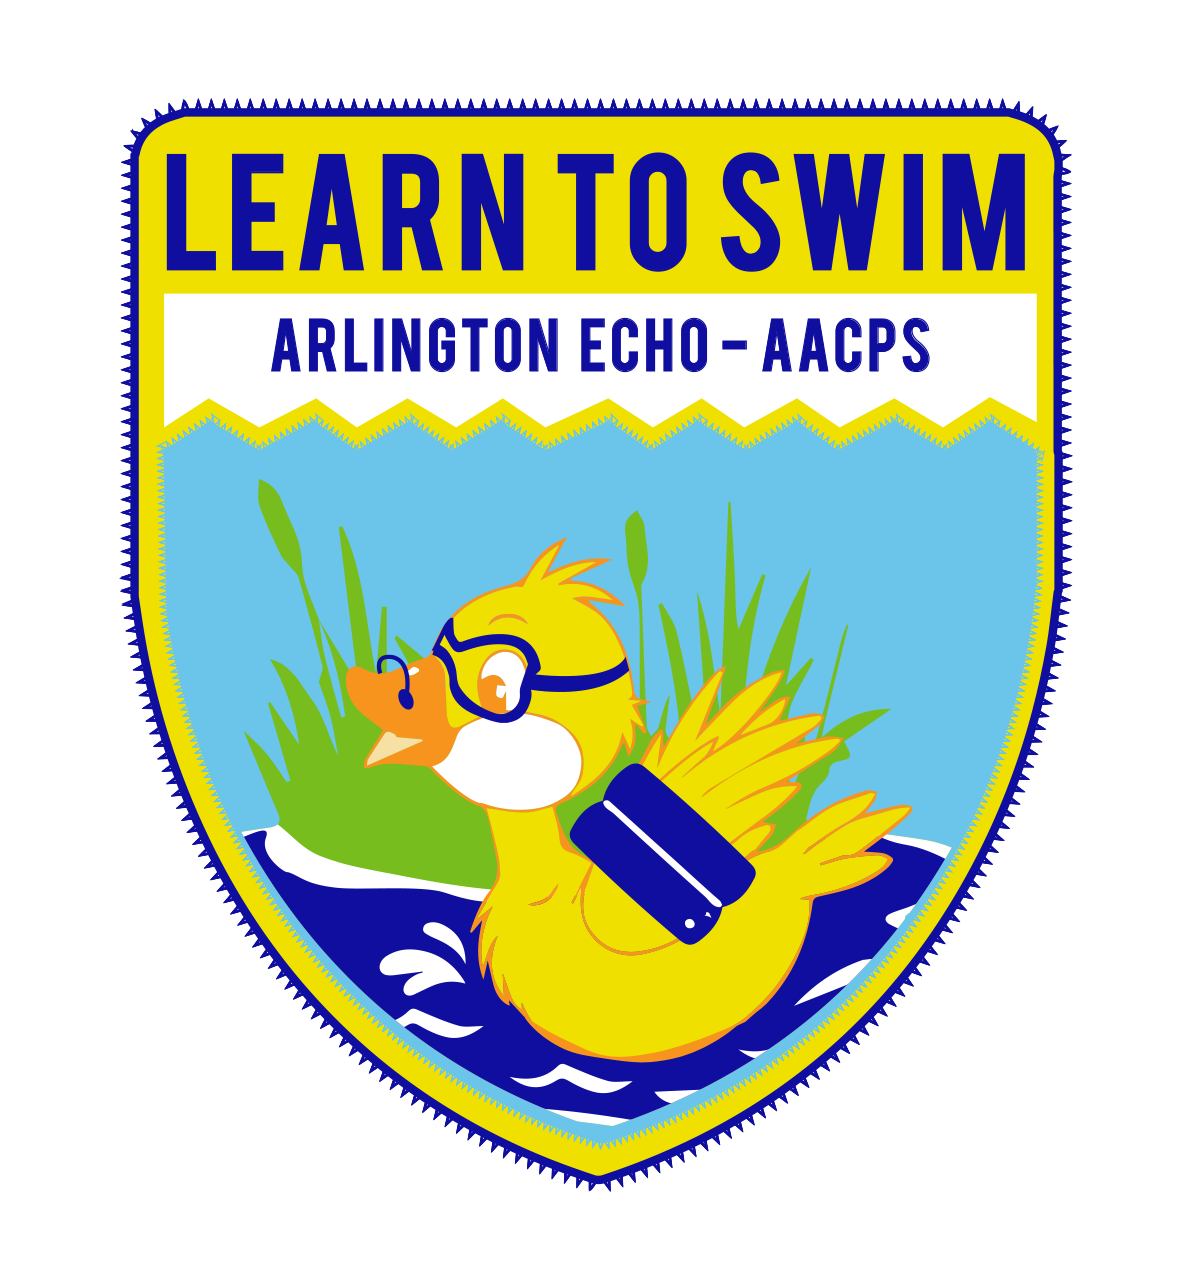 clipart swimming front crawl